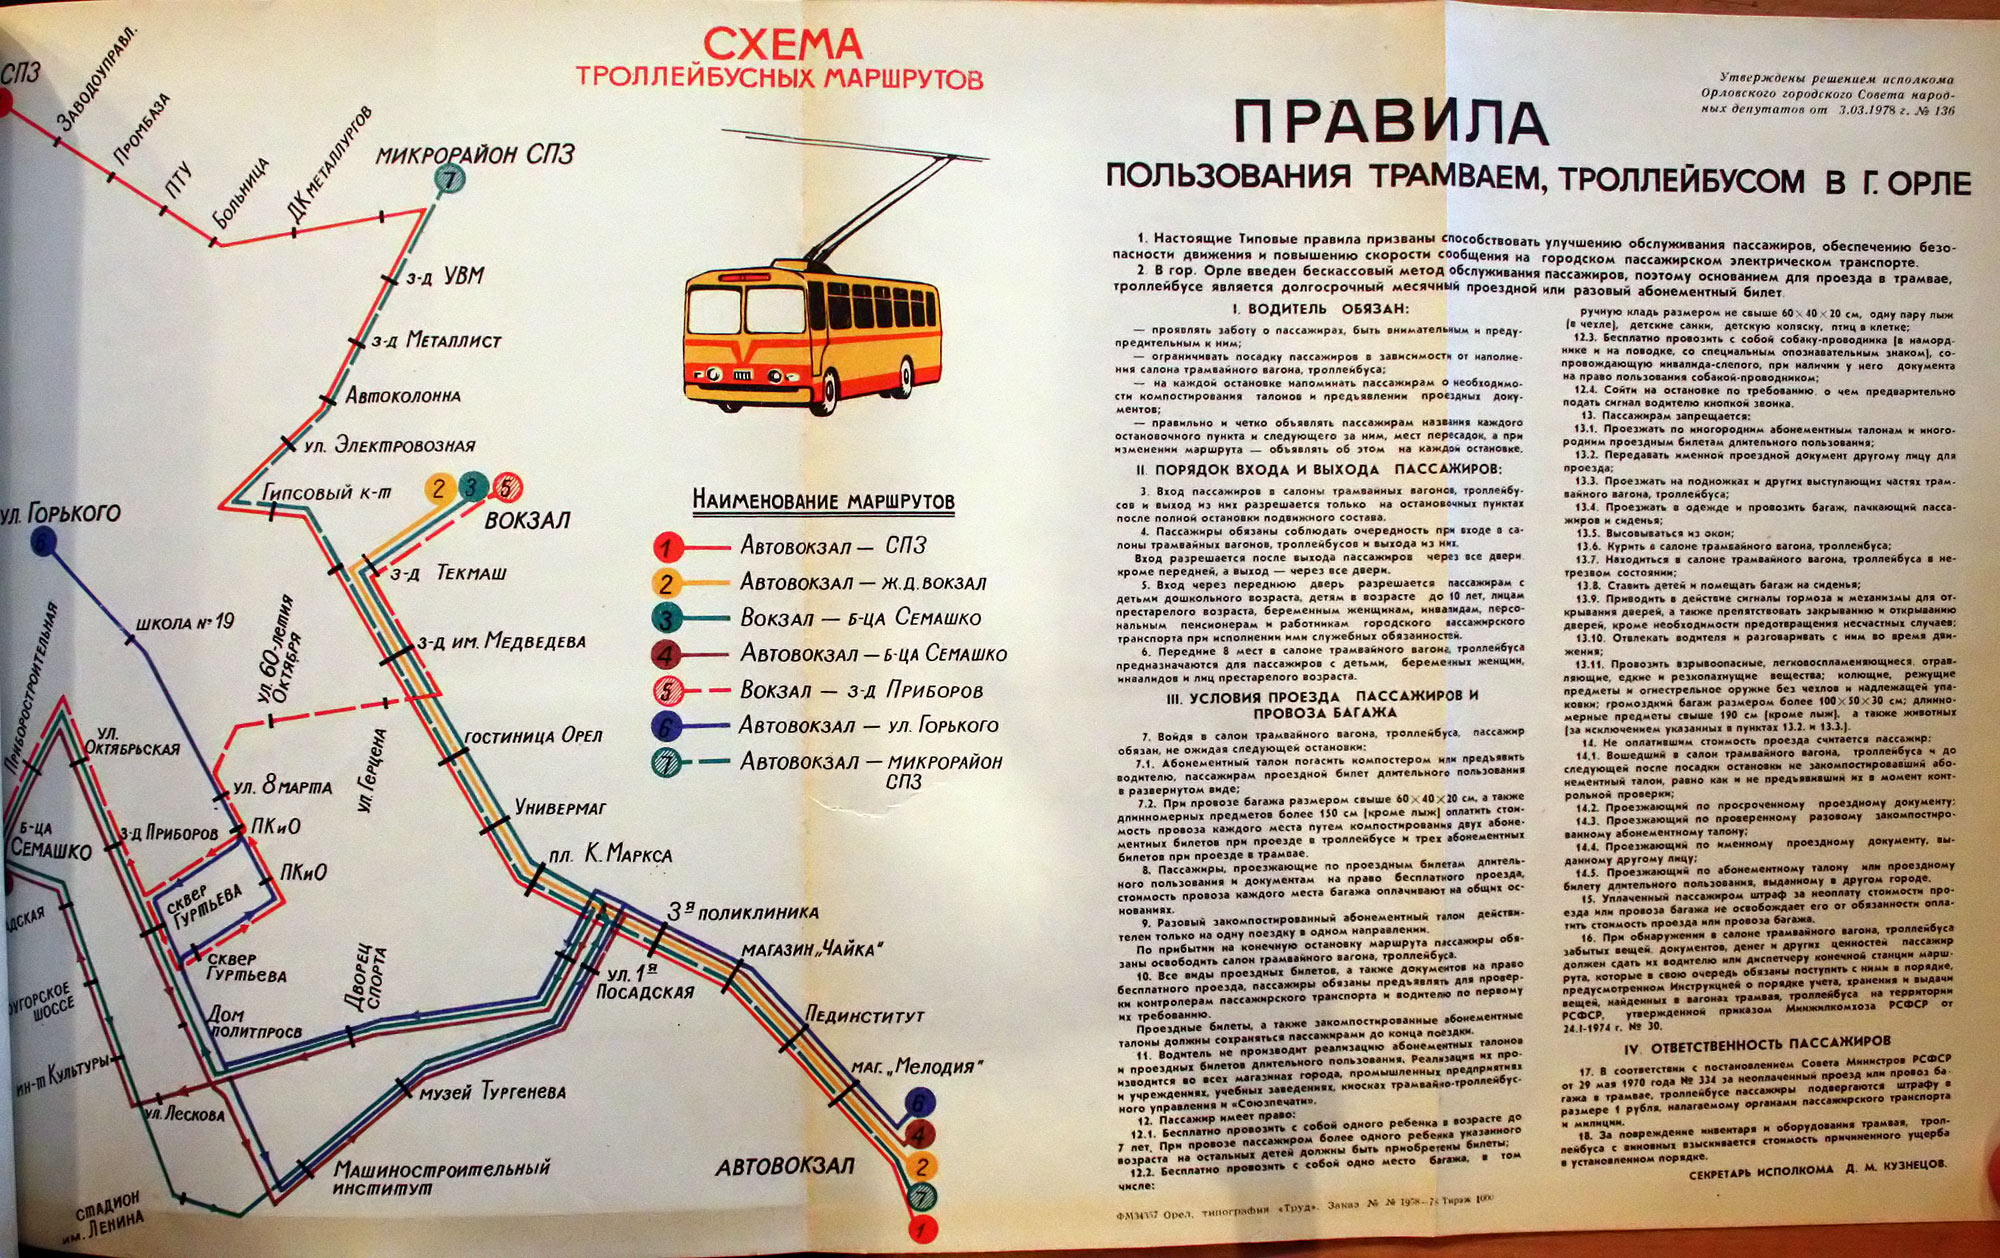 Oryol — Historical photos [1946-1991]; Oryol — Maps and Plans; Oryol — Stop shelters